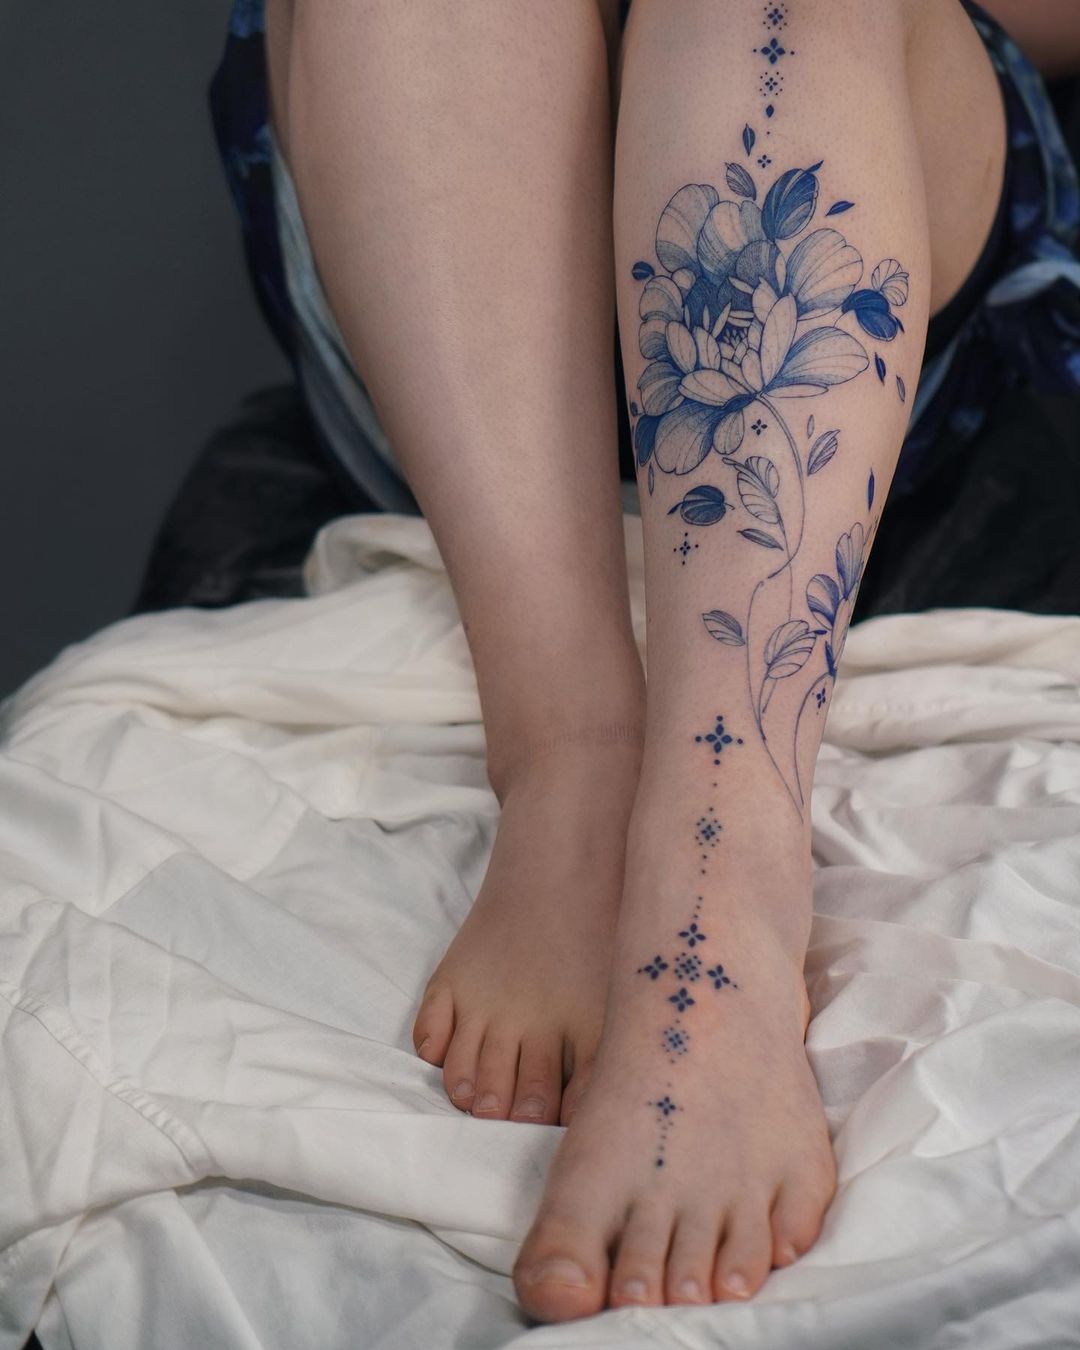 Floral leg sleeve tattoo by crush.on .line